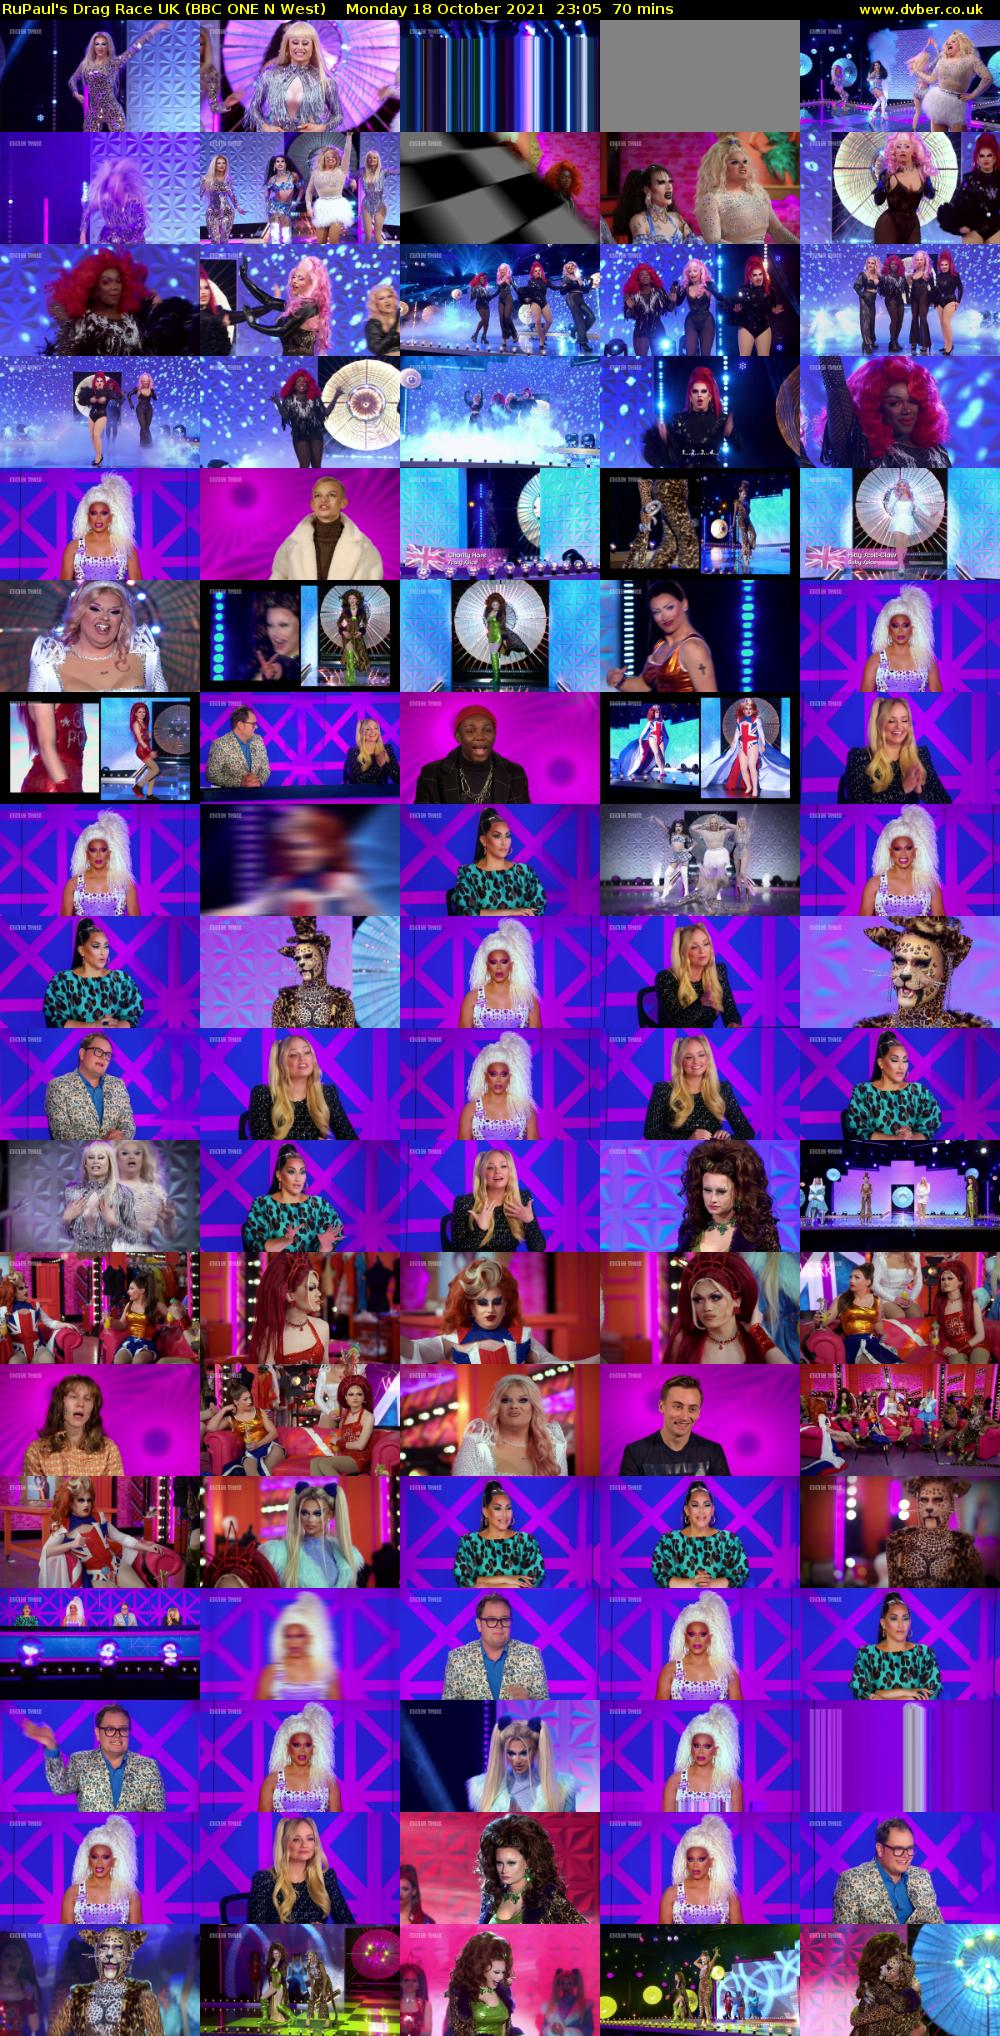 RuPaul's Drag Race UK (BBC ONE N West) Monday 18 October 2021 23:05 - 00:15